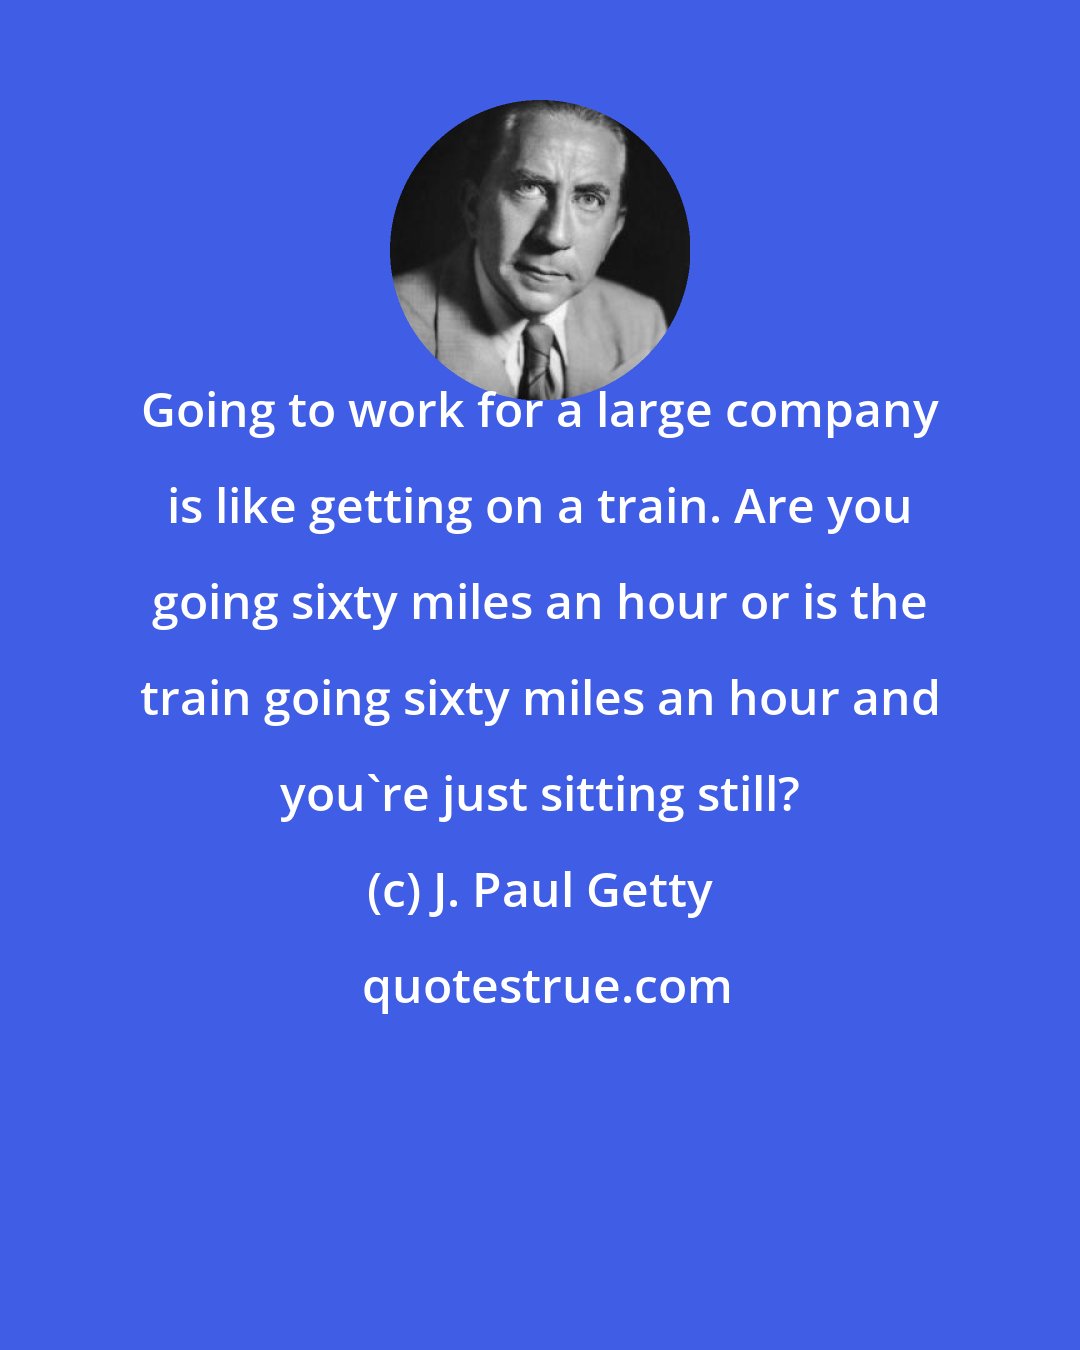 J. Paul Getty: Going to work for a large company is like getting on a train. Are you going sixty miles an hour or is the train going sixty miles an hour and you're just sitting still?